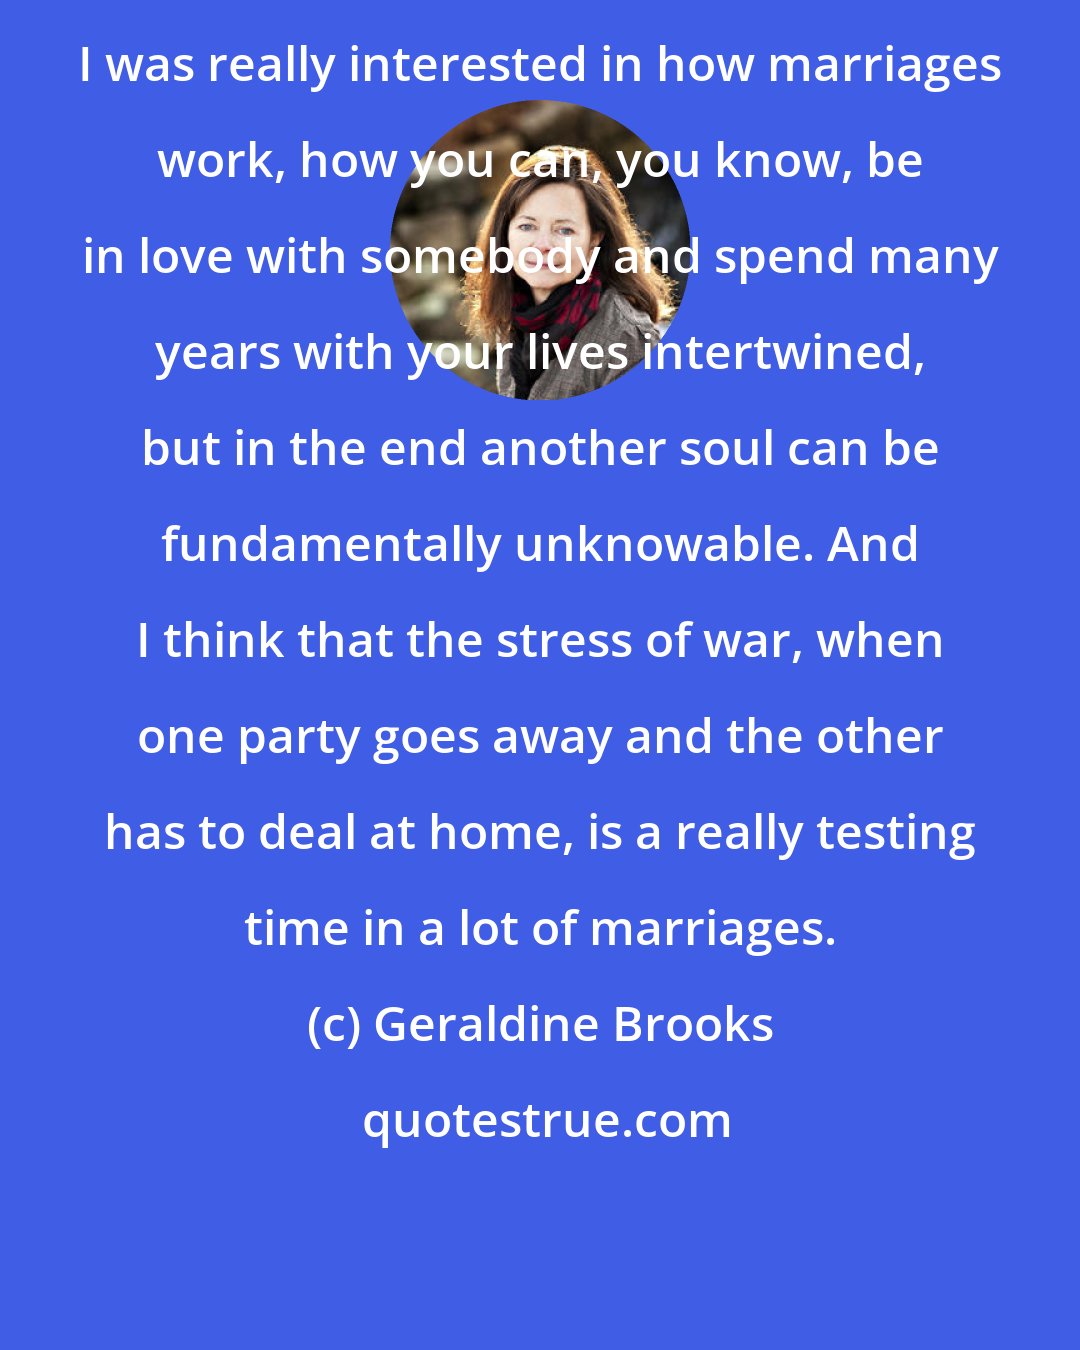 Geraldine Brooks: I was really interested in how marriages work, how you can, you know, be in love with somebody and spend many years with your lives intertwined, but in the end another soul can be fundamentally unknowable. And I think that the stress of war, when one party goes away and the other has to deal at home, is a really testing time in a lot of marriages.